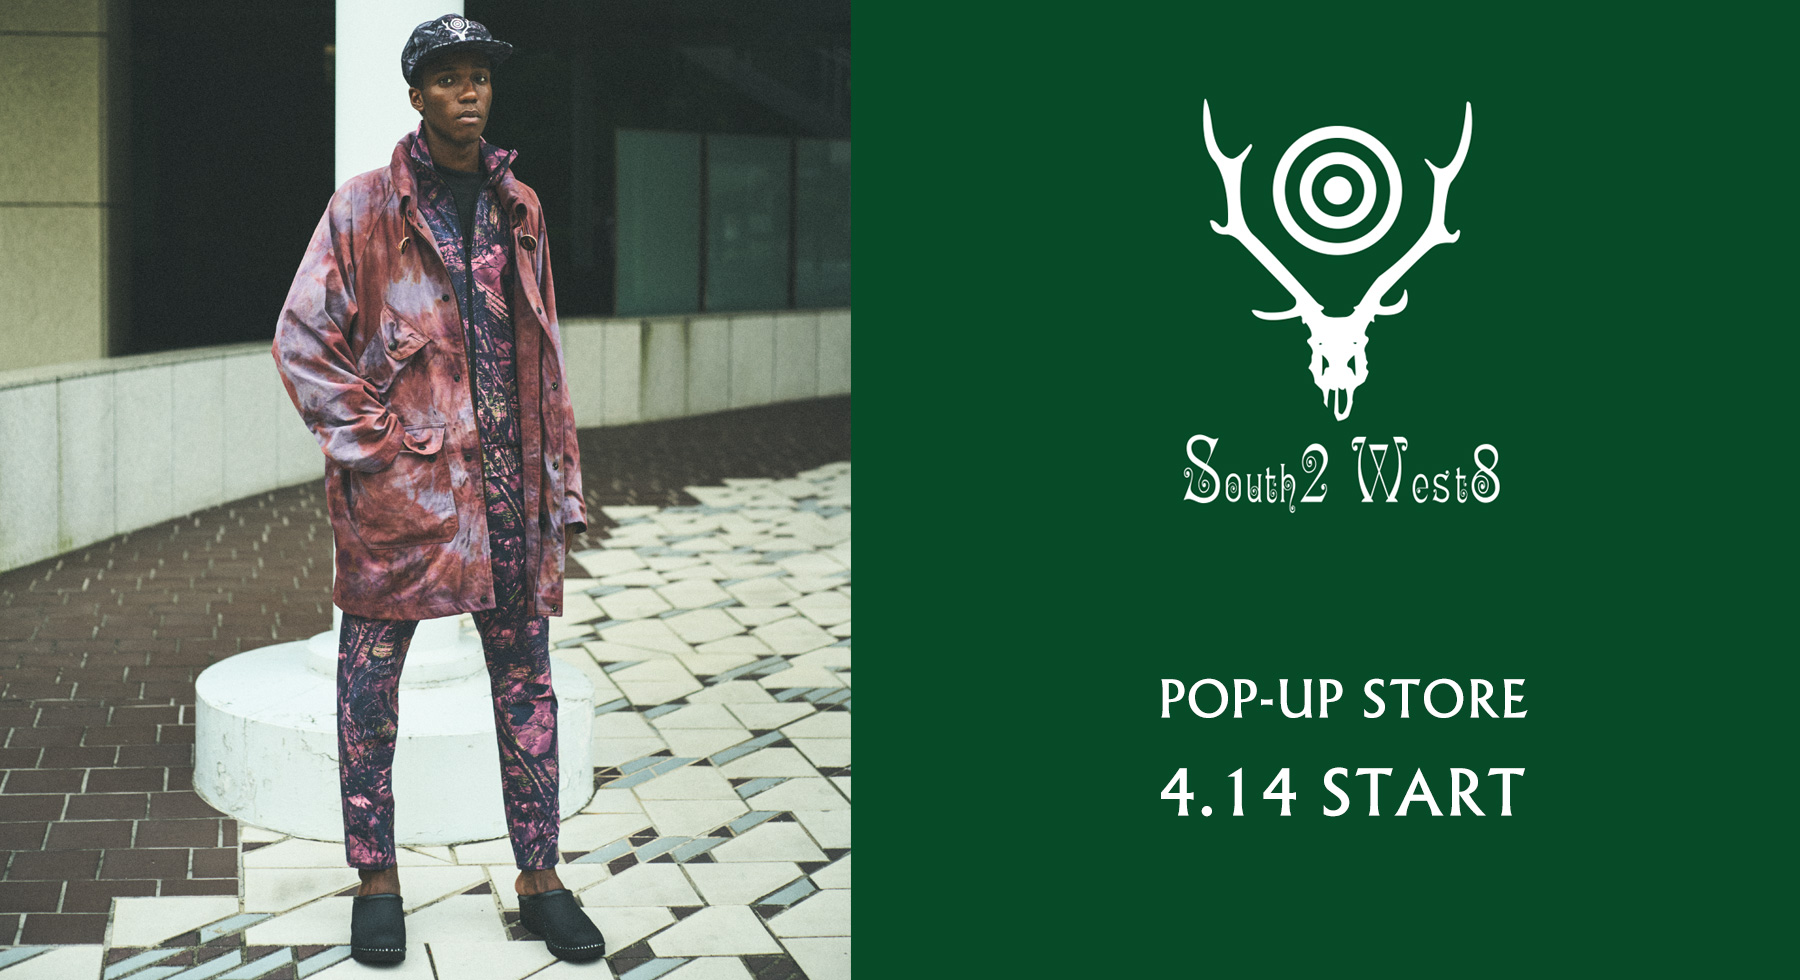 〈SOUTH2 WEST8〉 POP-UP STORE